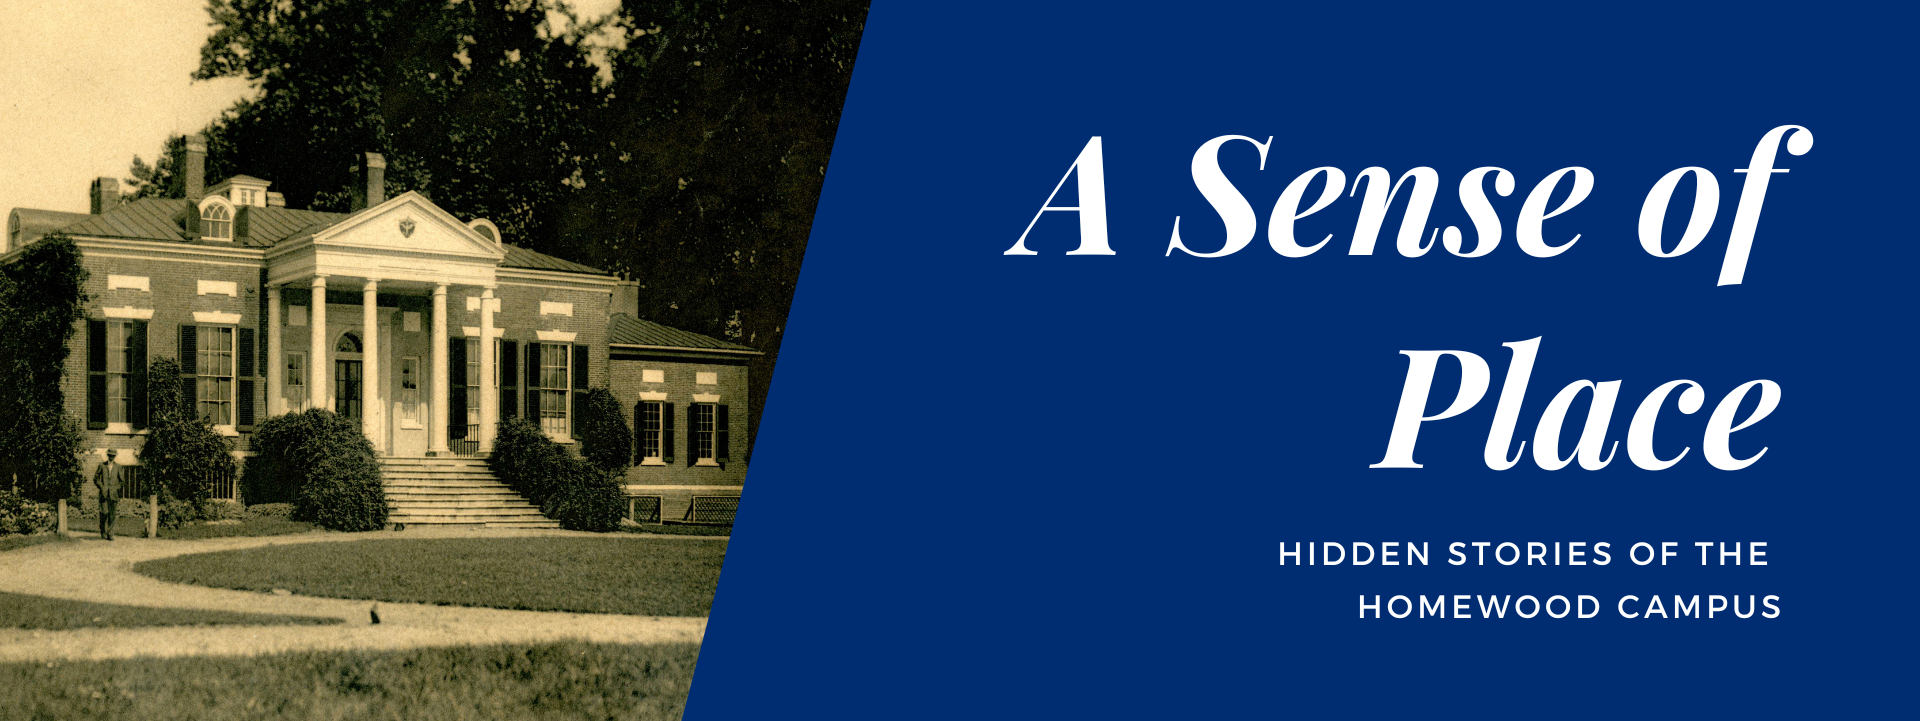 A graphic with a photo on the left and a slanted color background with white text on the right. The left is a photograph of the Homewood Estate, a two-story neo-classical home. The text on the right says, "A Sense of Place Hidden Stories of the Homewood Campus".